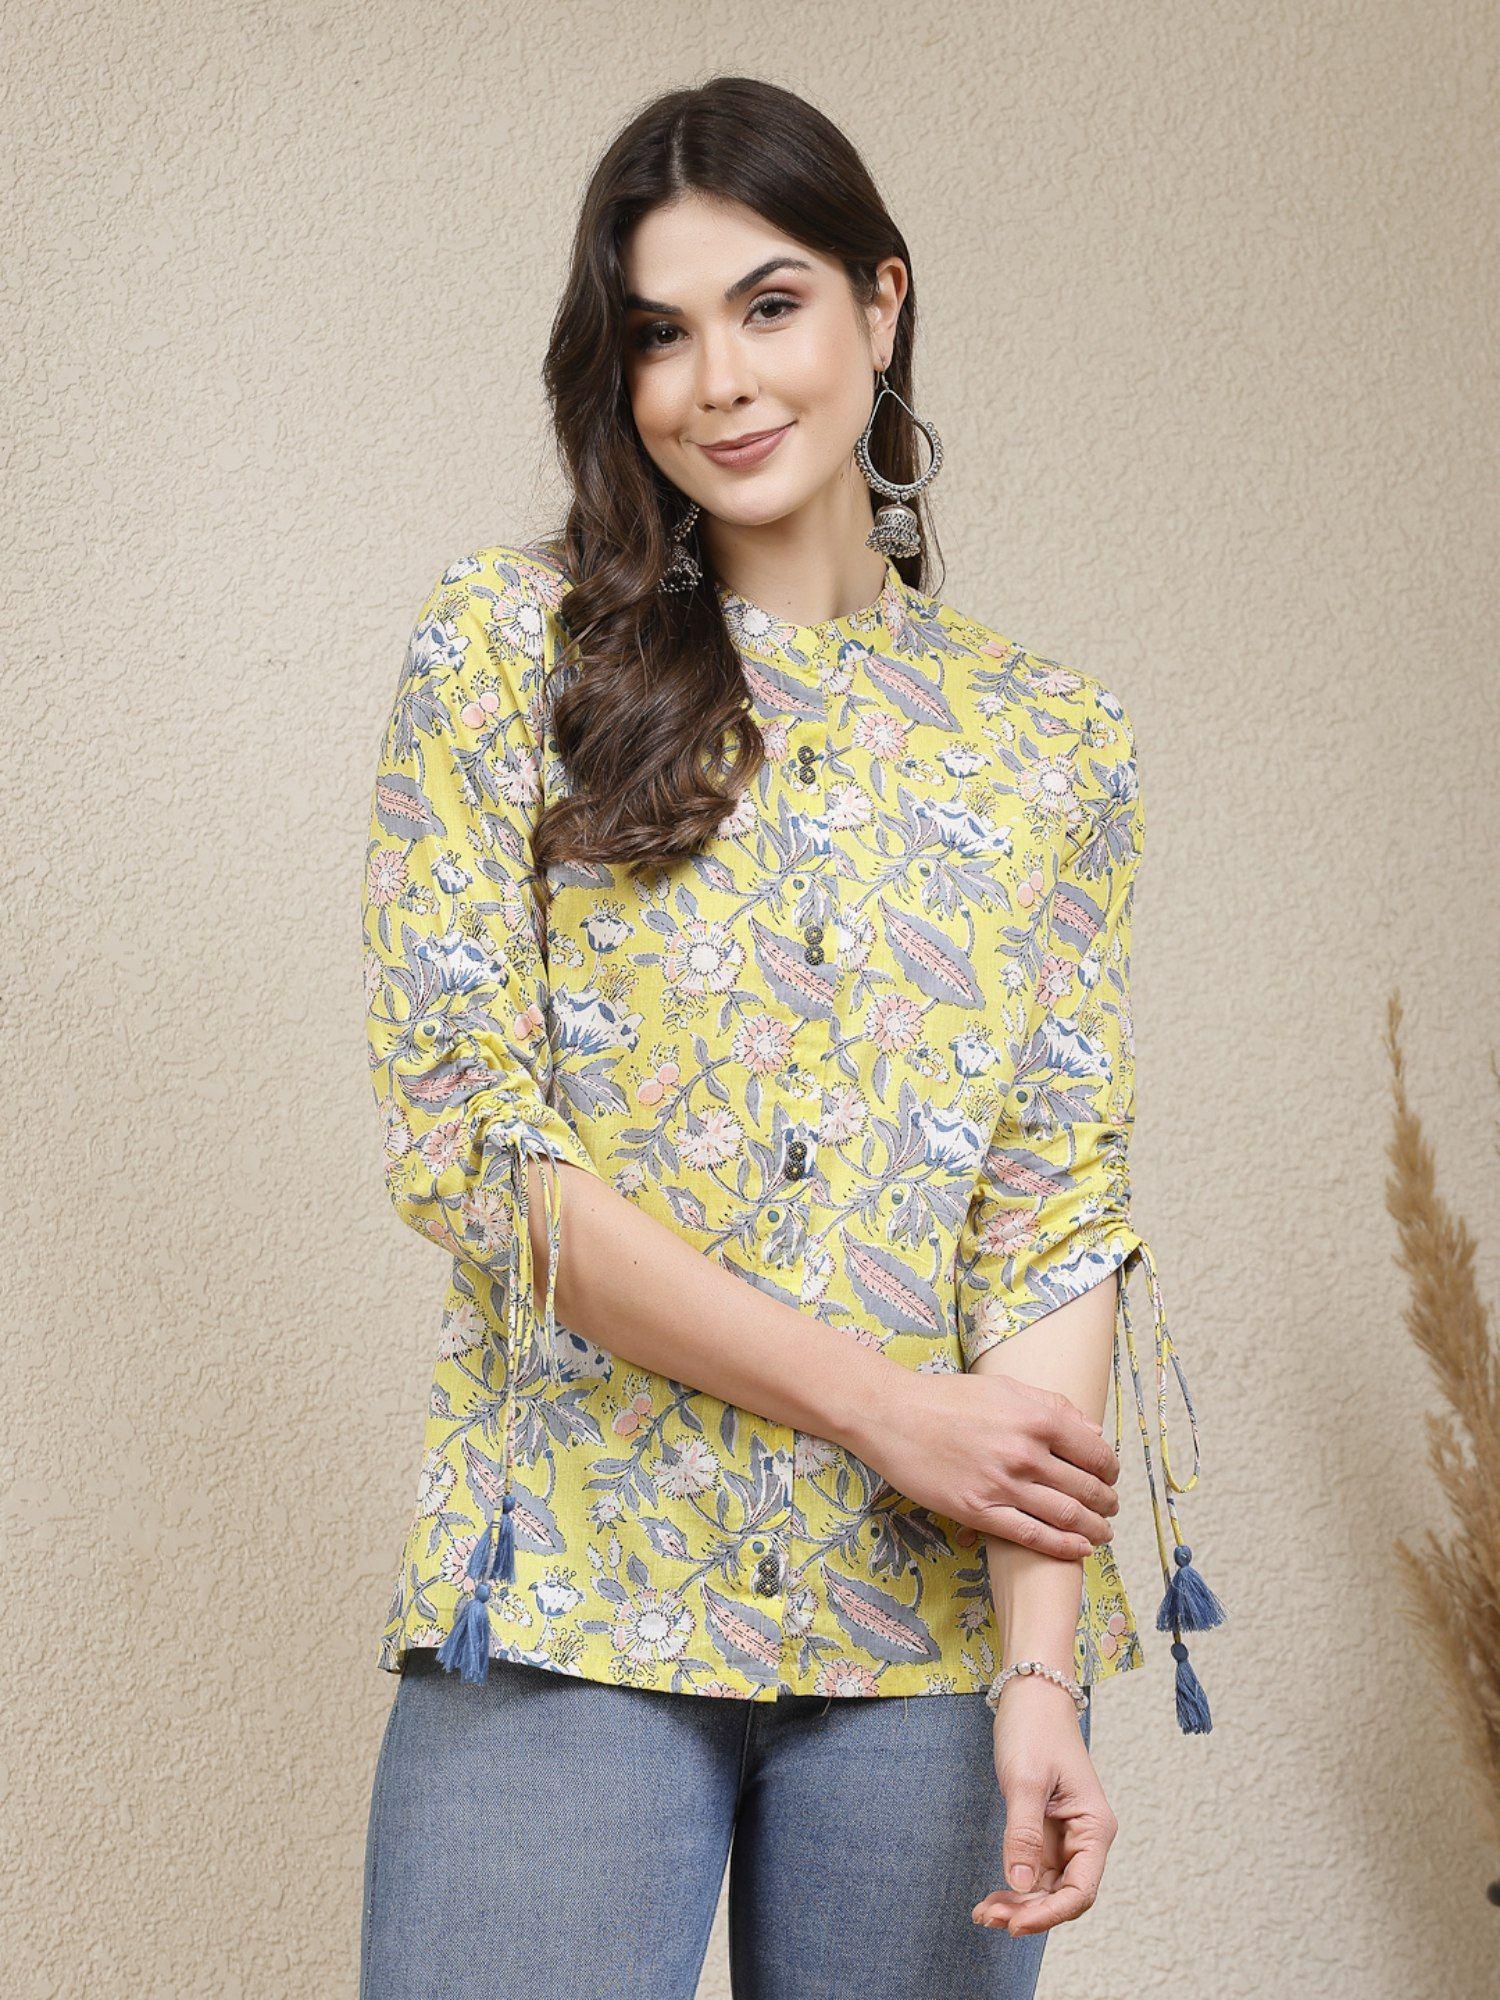 women yellow floral printed cotton shirt style top